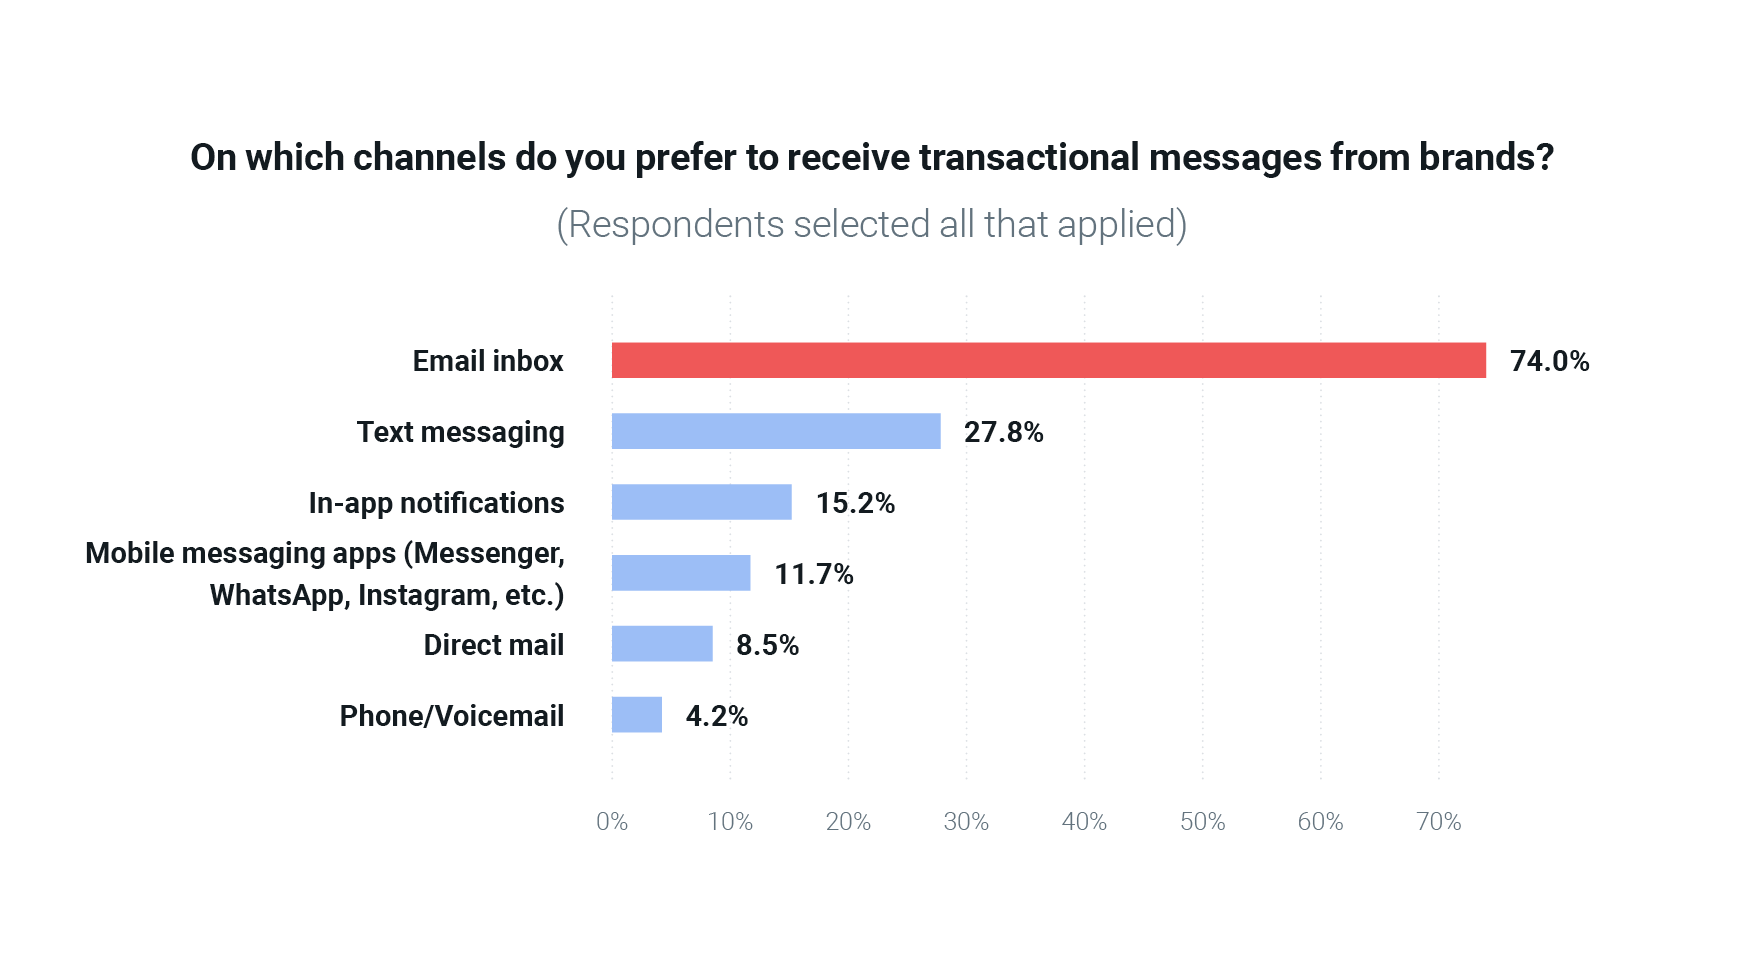 Graph depicts 74% of respondents prefer email for receiving transactional messages.